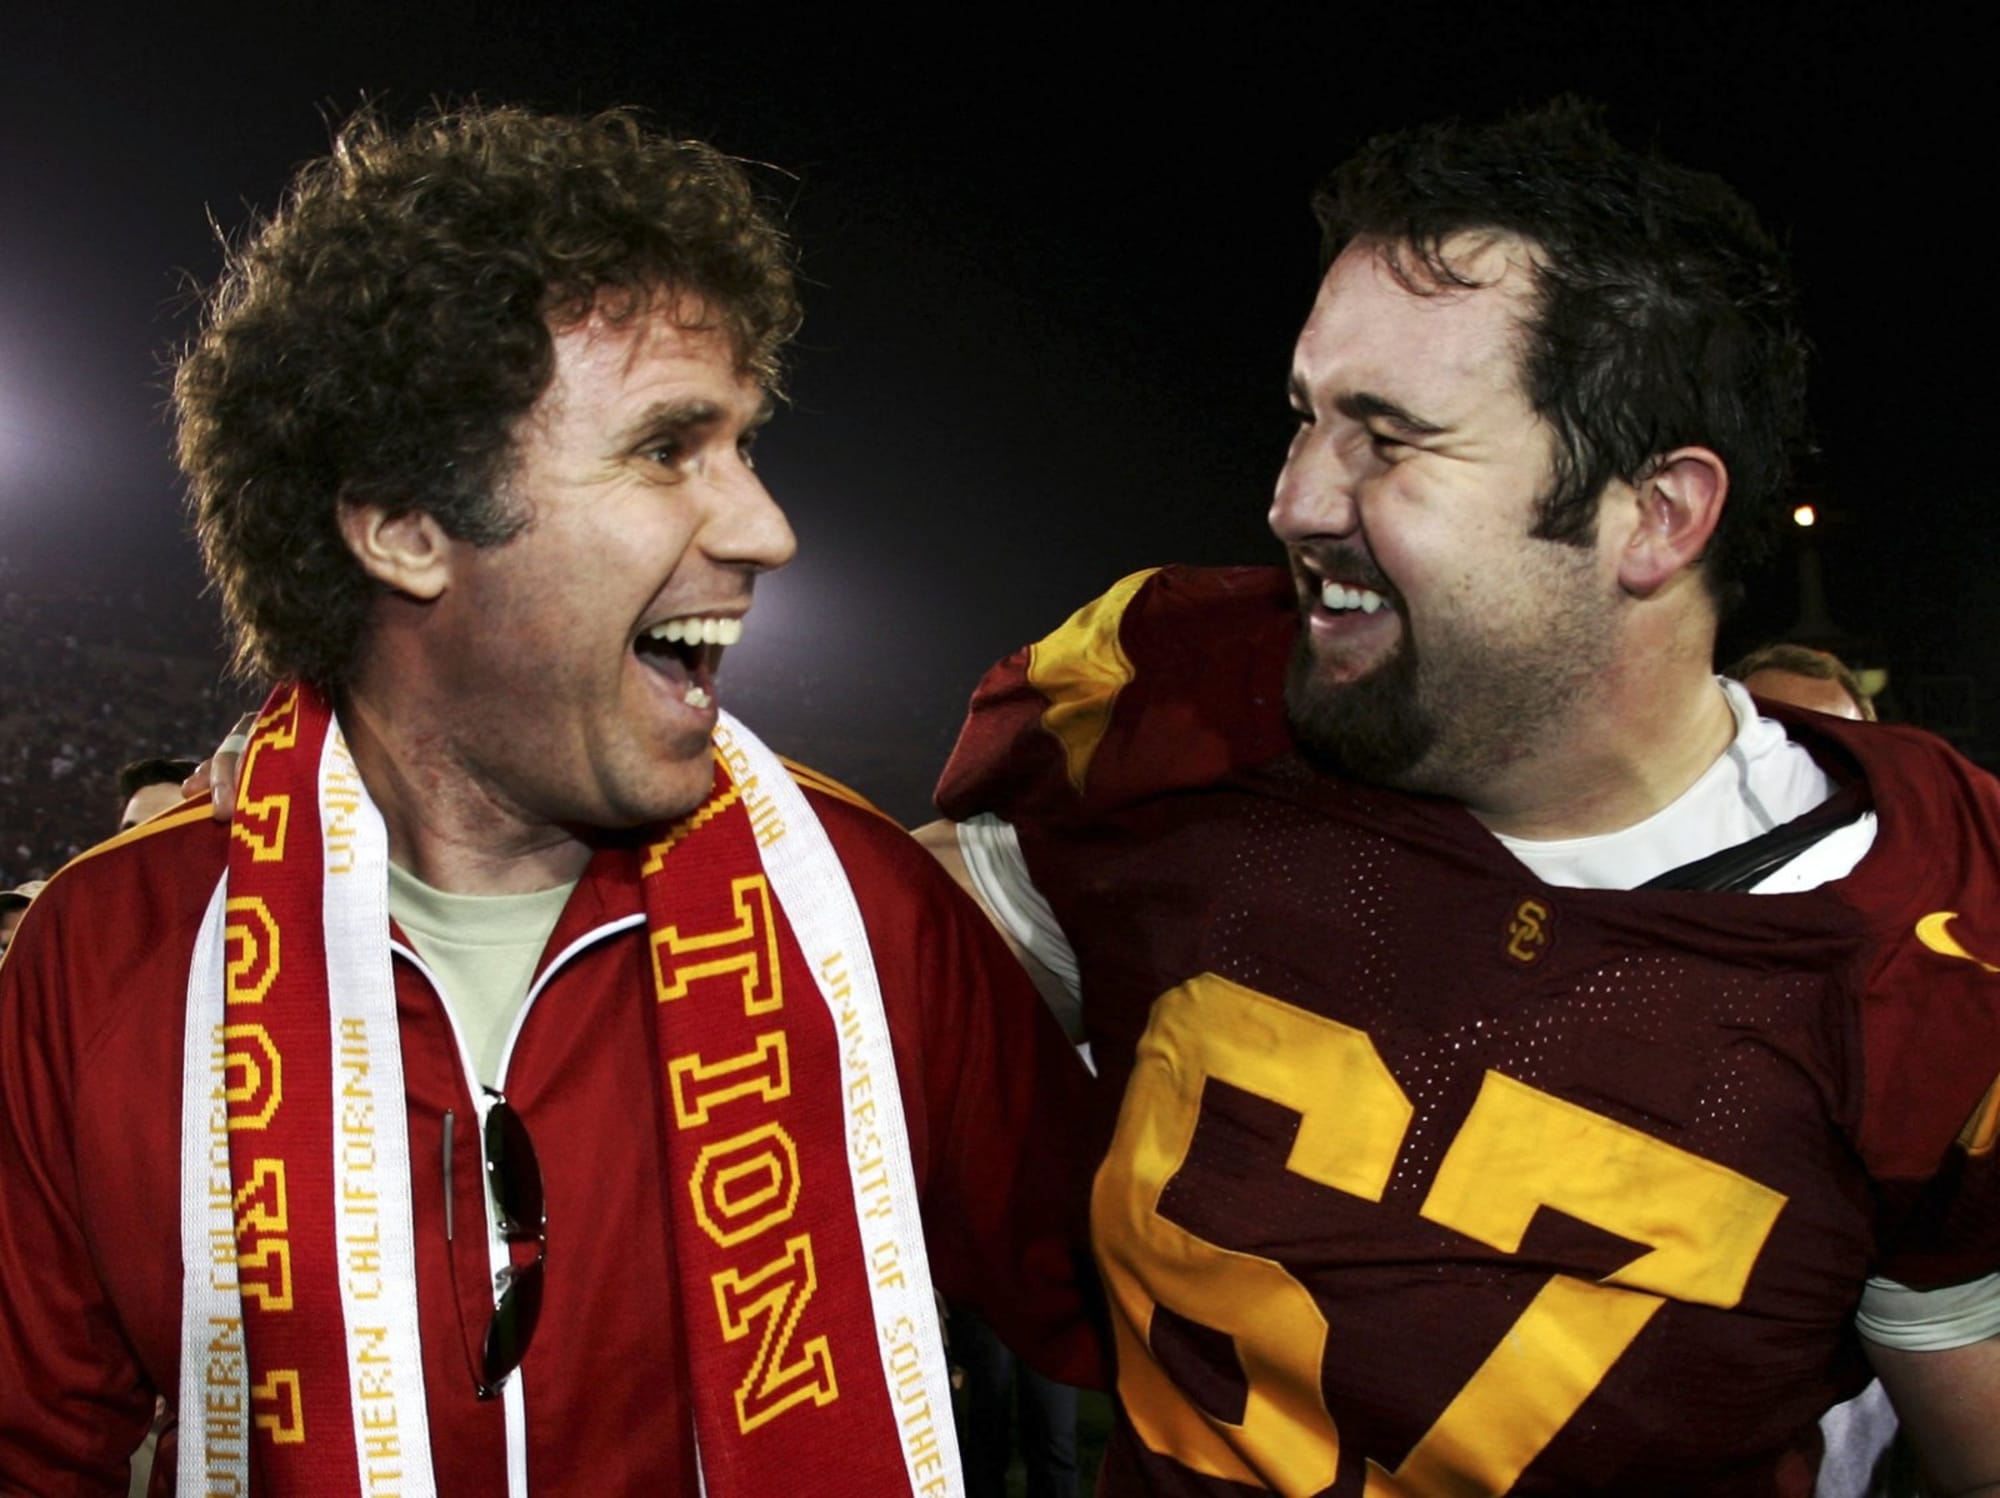 USC football: Ten biggest celebrity fans who cheer on the Trojans - Page 6